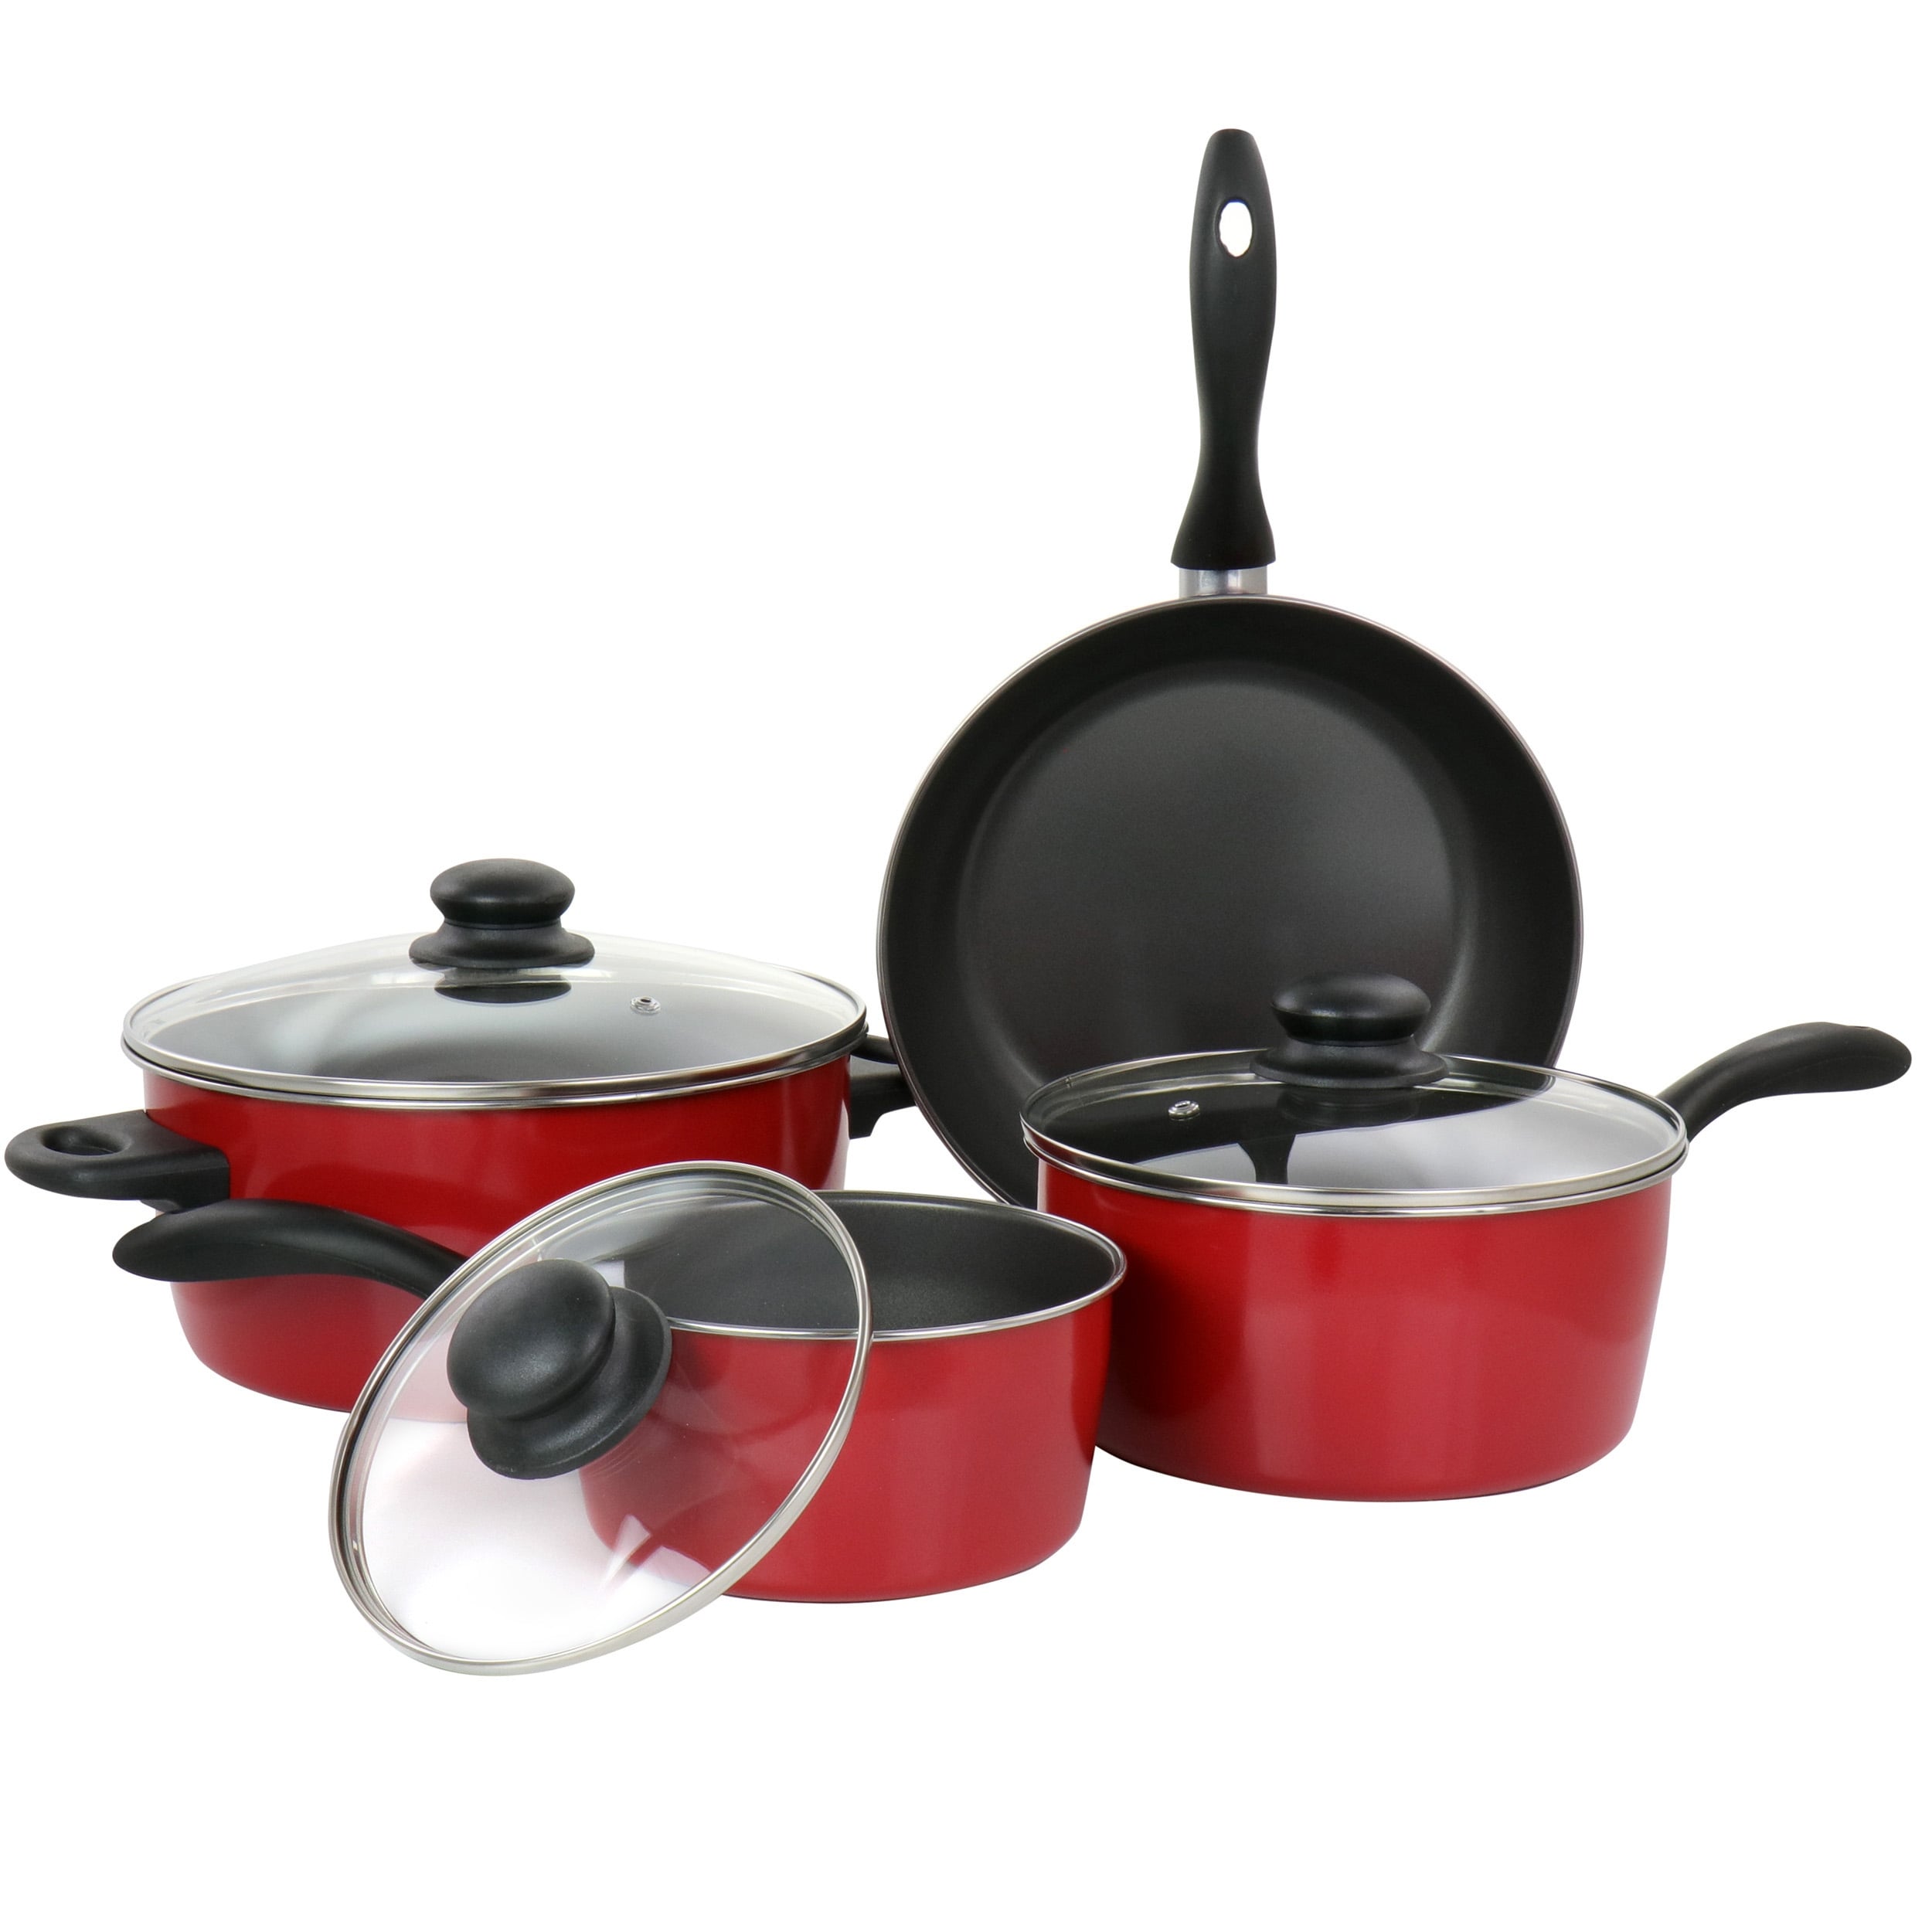 https://ak1.ostkcdn.com/images/products/is/images/direct/ea2628e44b1bb5aeaed2b14fdeb79ca1d3f3e243/Gibson-Home-Armada-7-Piece-Nonstick-Carbon-Steel-Cookware-Set-in-Red.jpg